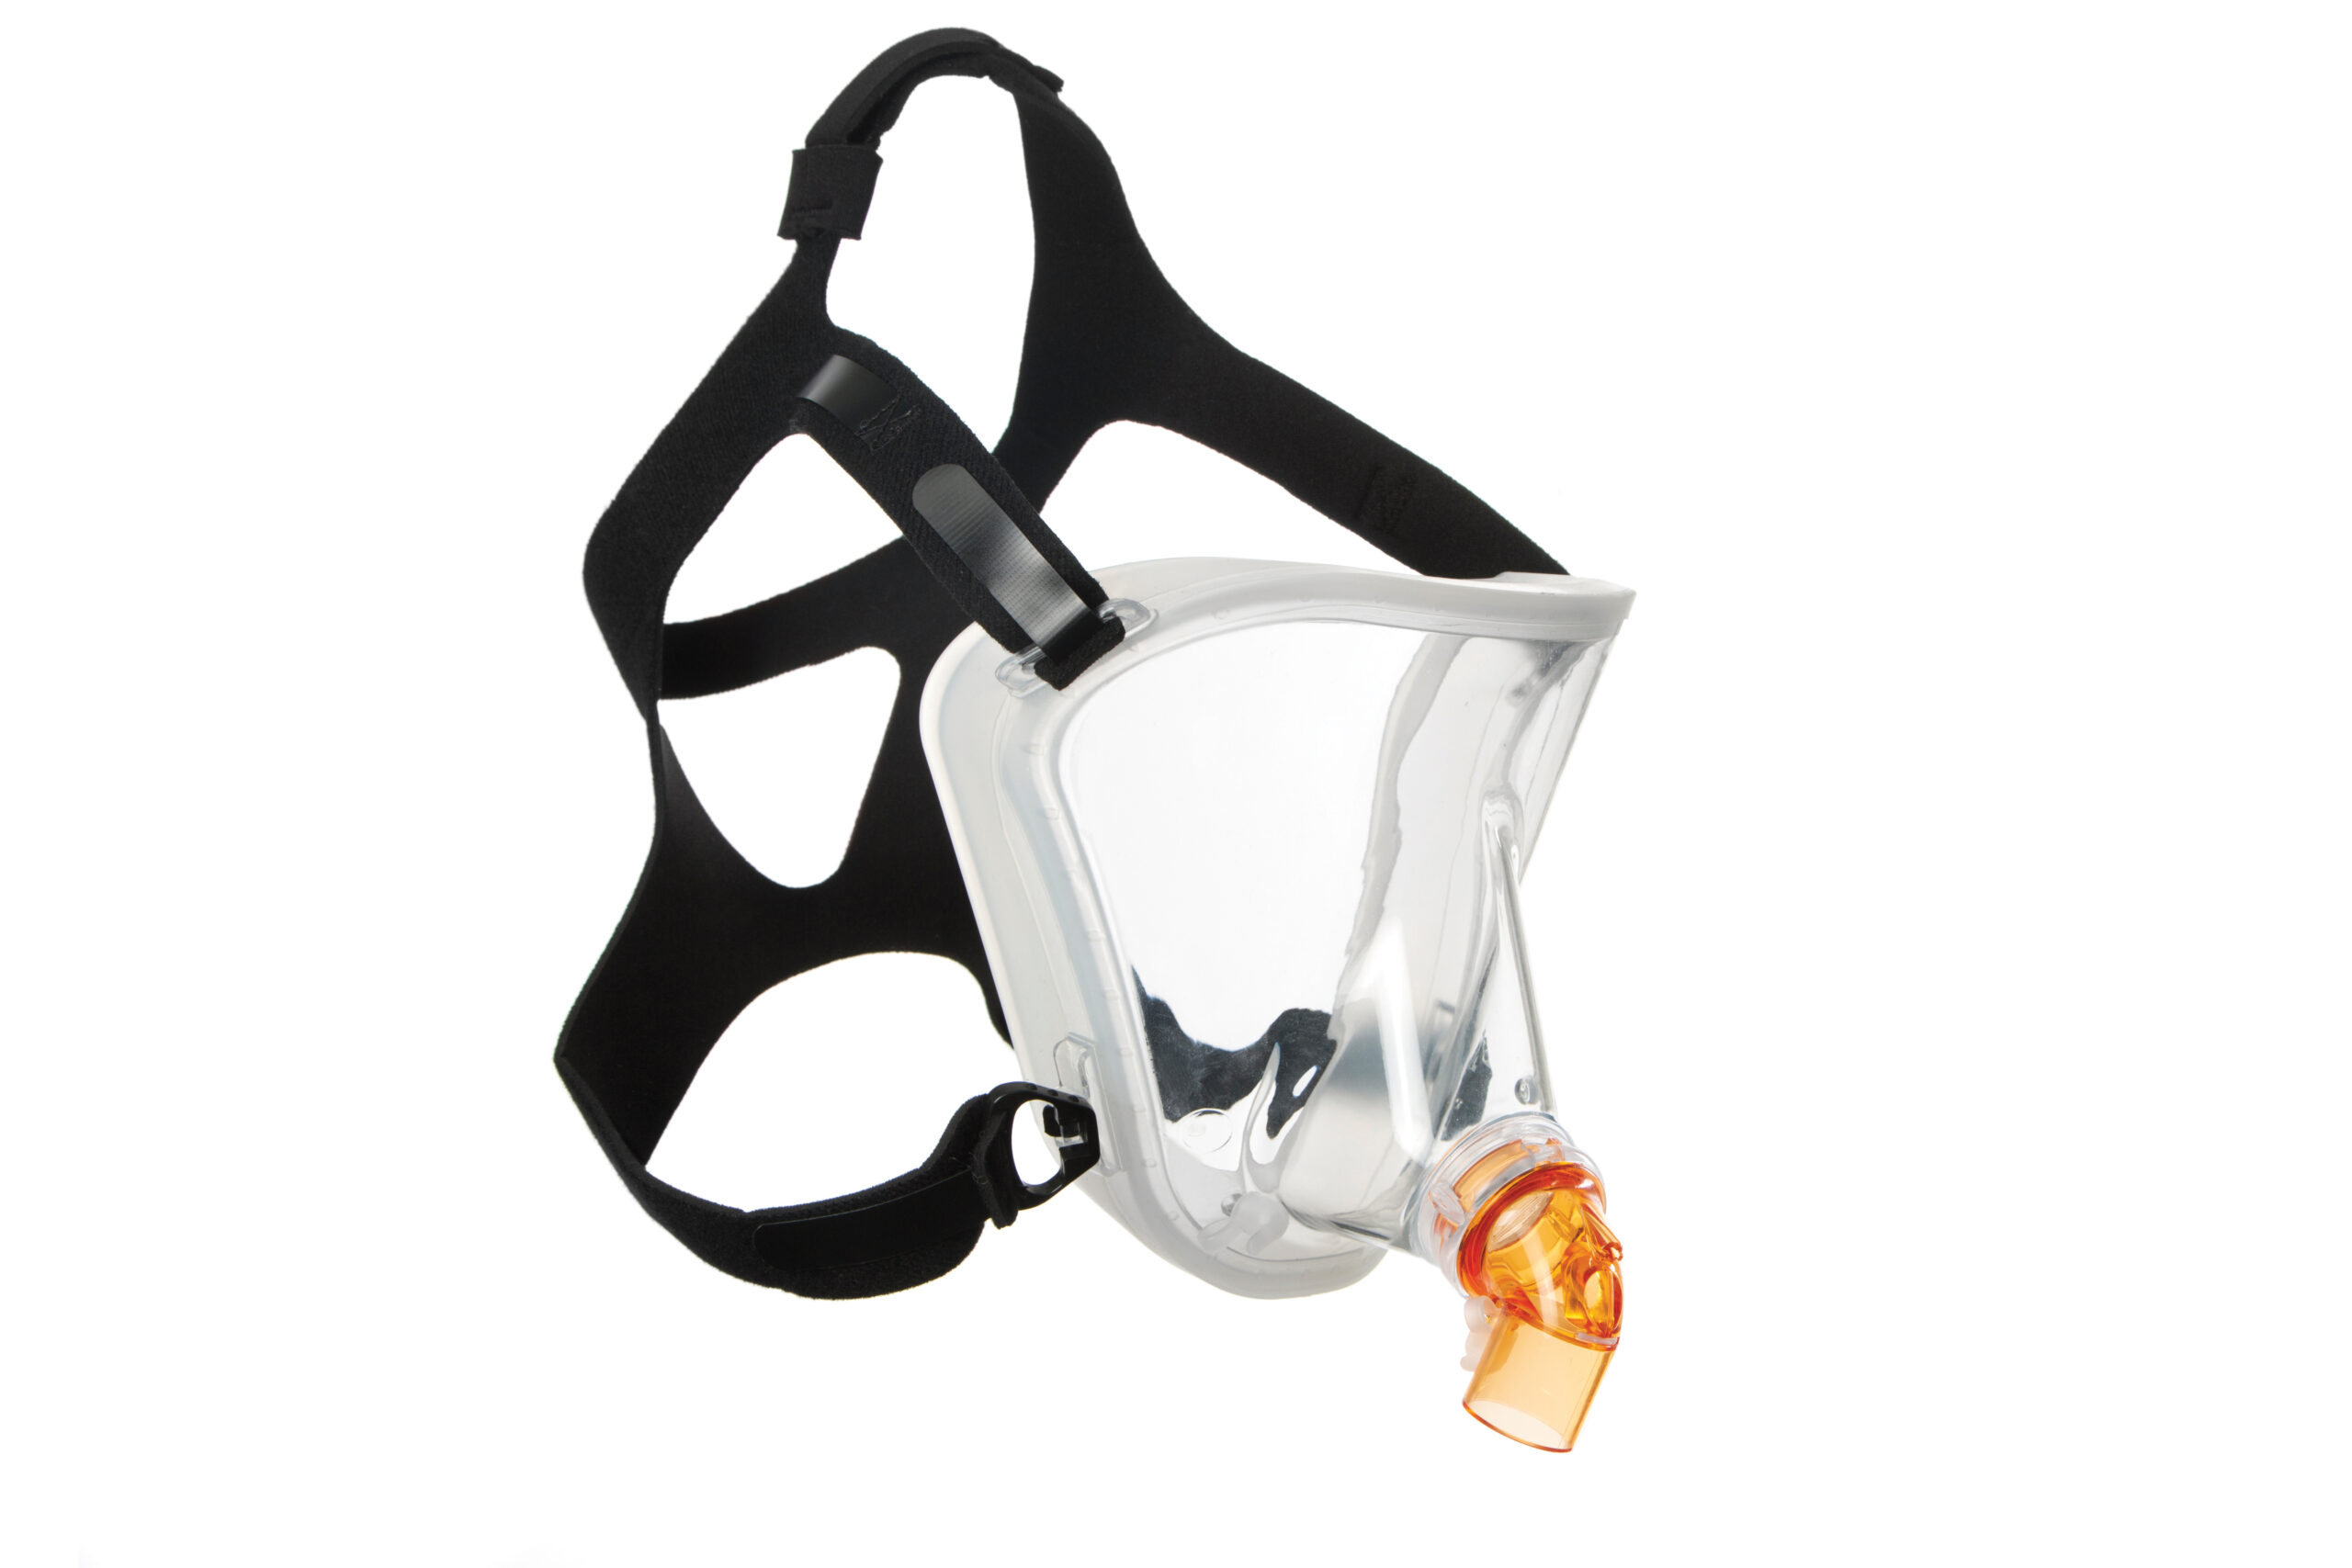 313-9552-BiTrac-MaxShield-Select-total-face-mask-non-vented-elbow-with-anti-asphyxiation-valve-large-adult